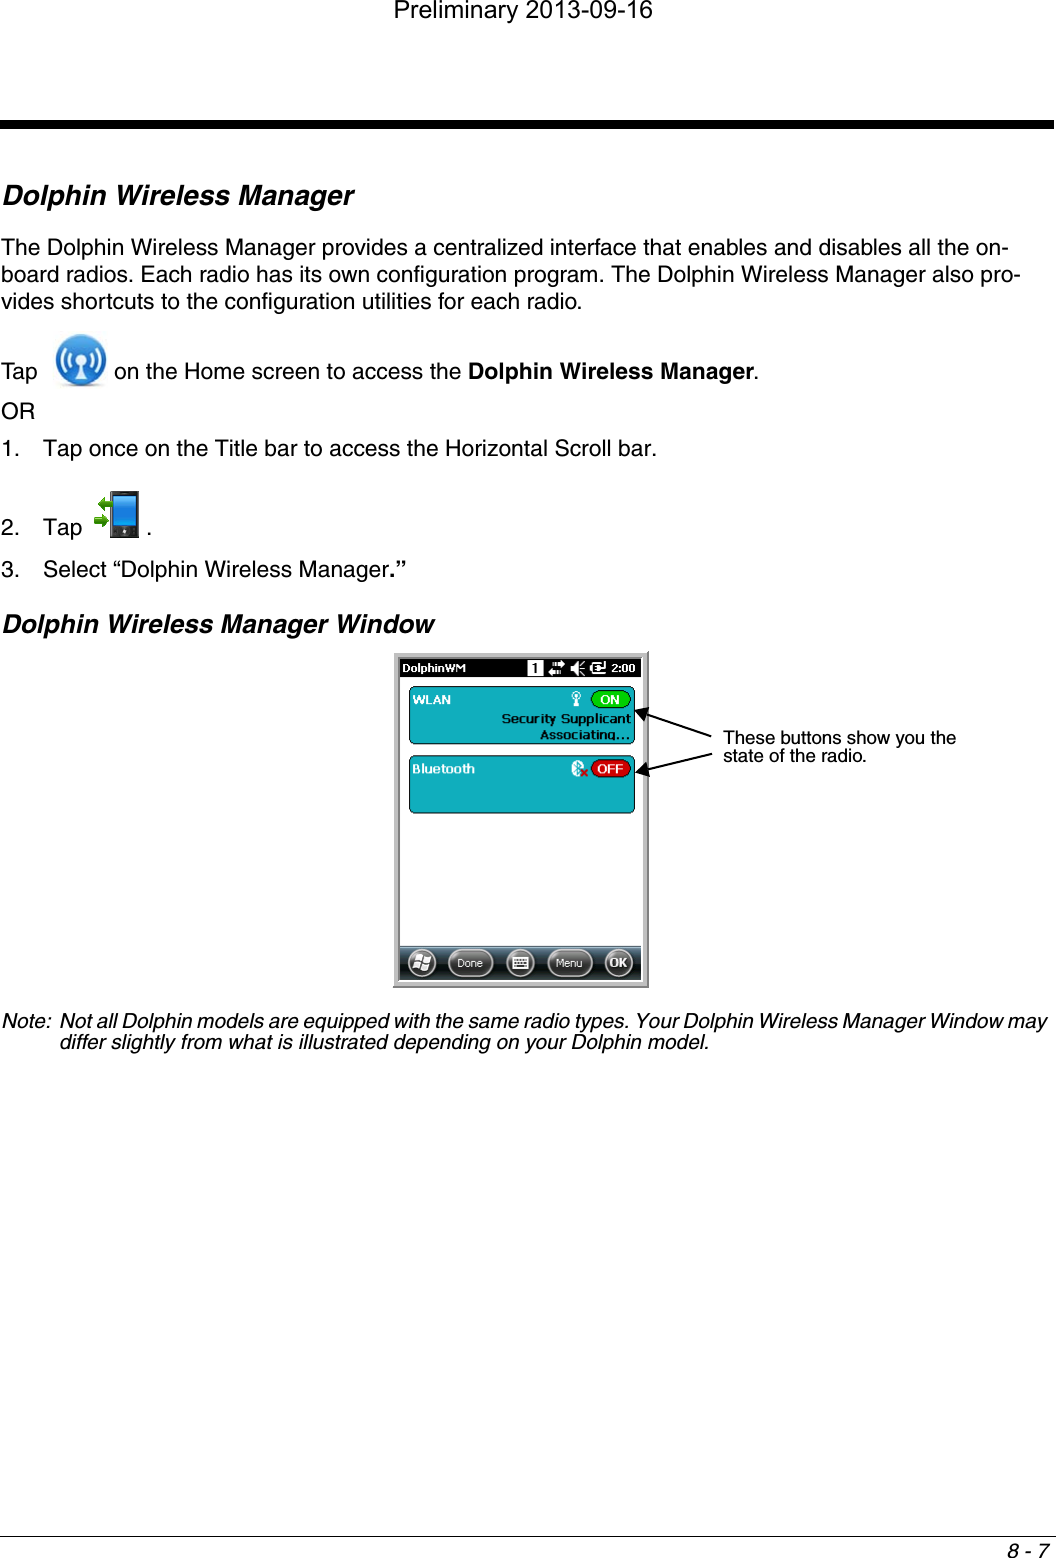 8 - 7Dolphin Wireless ManagerThe Dolphin Wireless Manager provides a centralized interface that enables and disables all the on-board radios. Each radio has its own configuration program. The Dolphin Wireless Manager also pro-vides shortcuts to the configuration utilities for each radio. Tap    on the Home screen to access the Dolphin Wireless Manager.OR 1. Tap once on the Title bar to access the Horizontal Scroll bar. 2. Tap . 3. Select “Dolphin Wireless Manager.”Dolphin Wireless Manager WindowNote: Not all Dolphin models are equipped with the same radio types. Your Dolphin Wireless Manager Window may differ slightly from what is illustrated depending on your Dolphin model.These buttons show you the state of the radio.Preliminary 2013-09-16